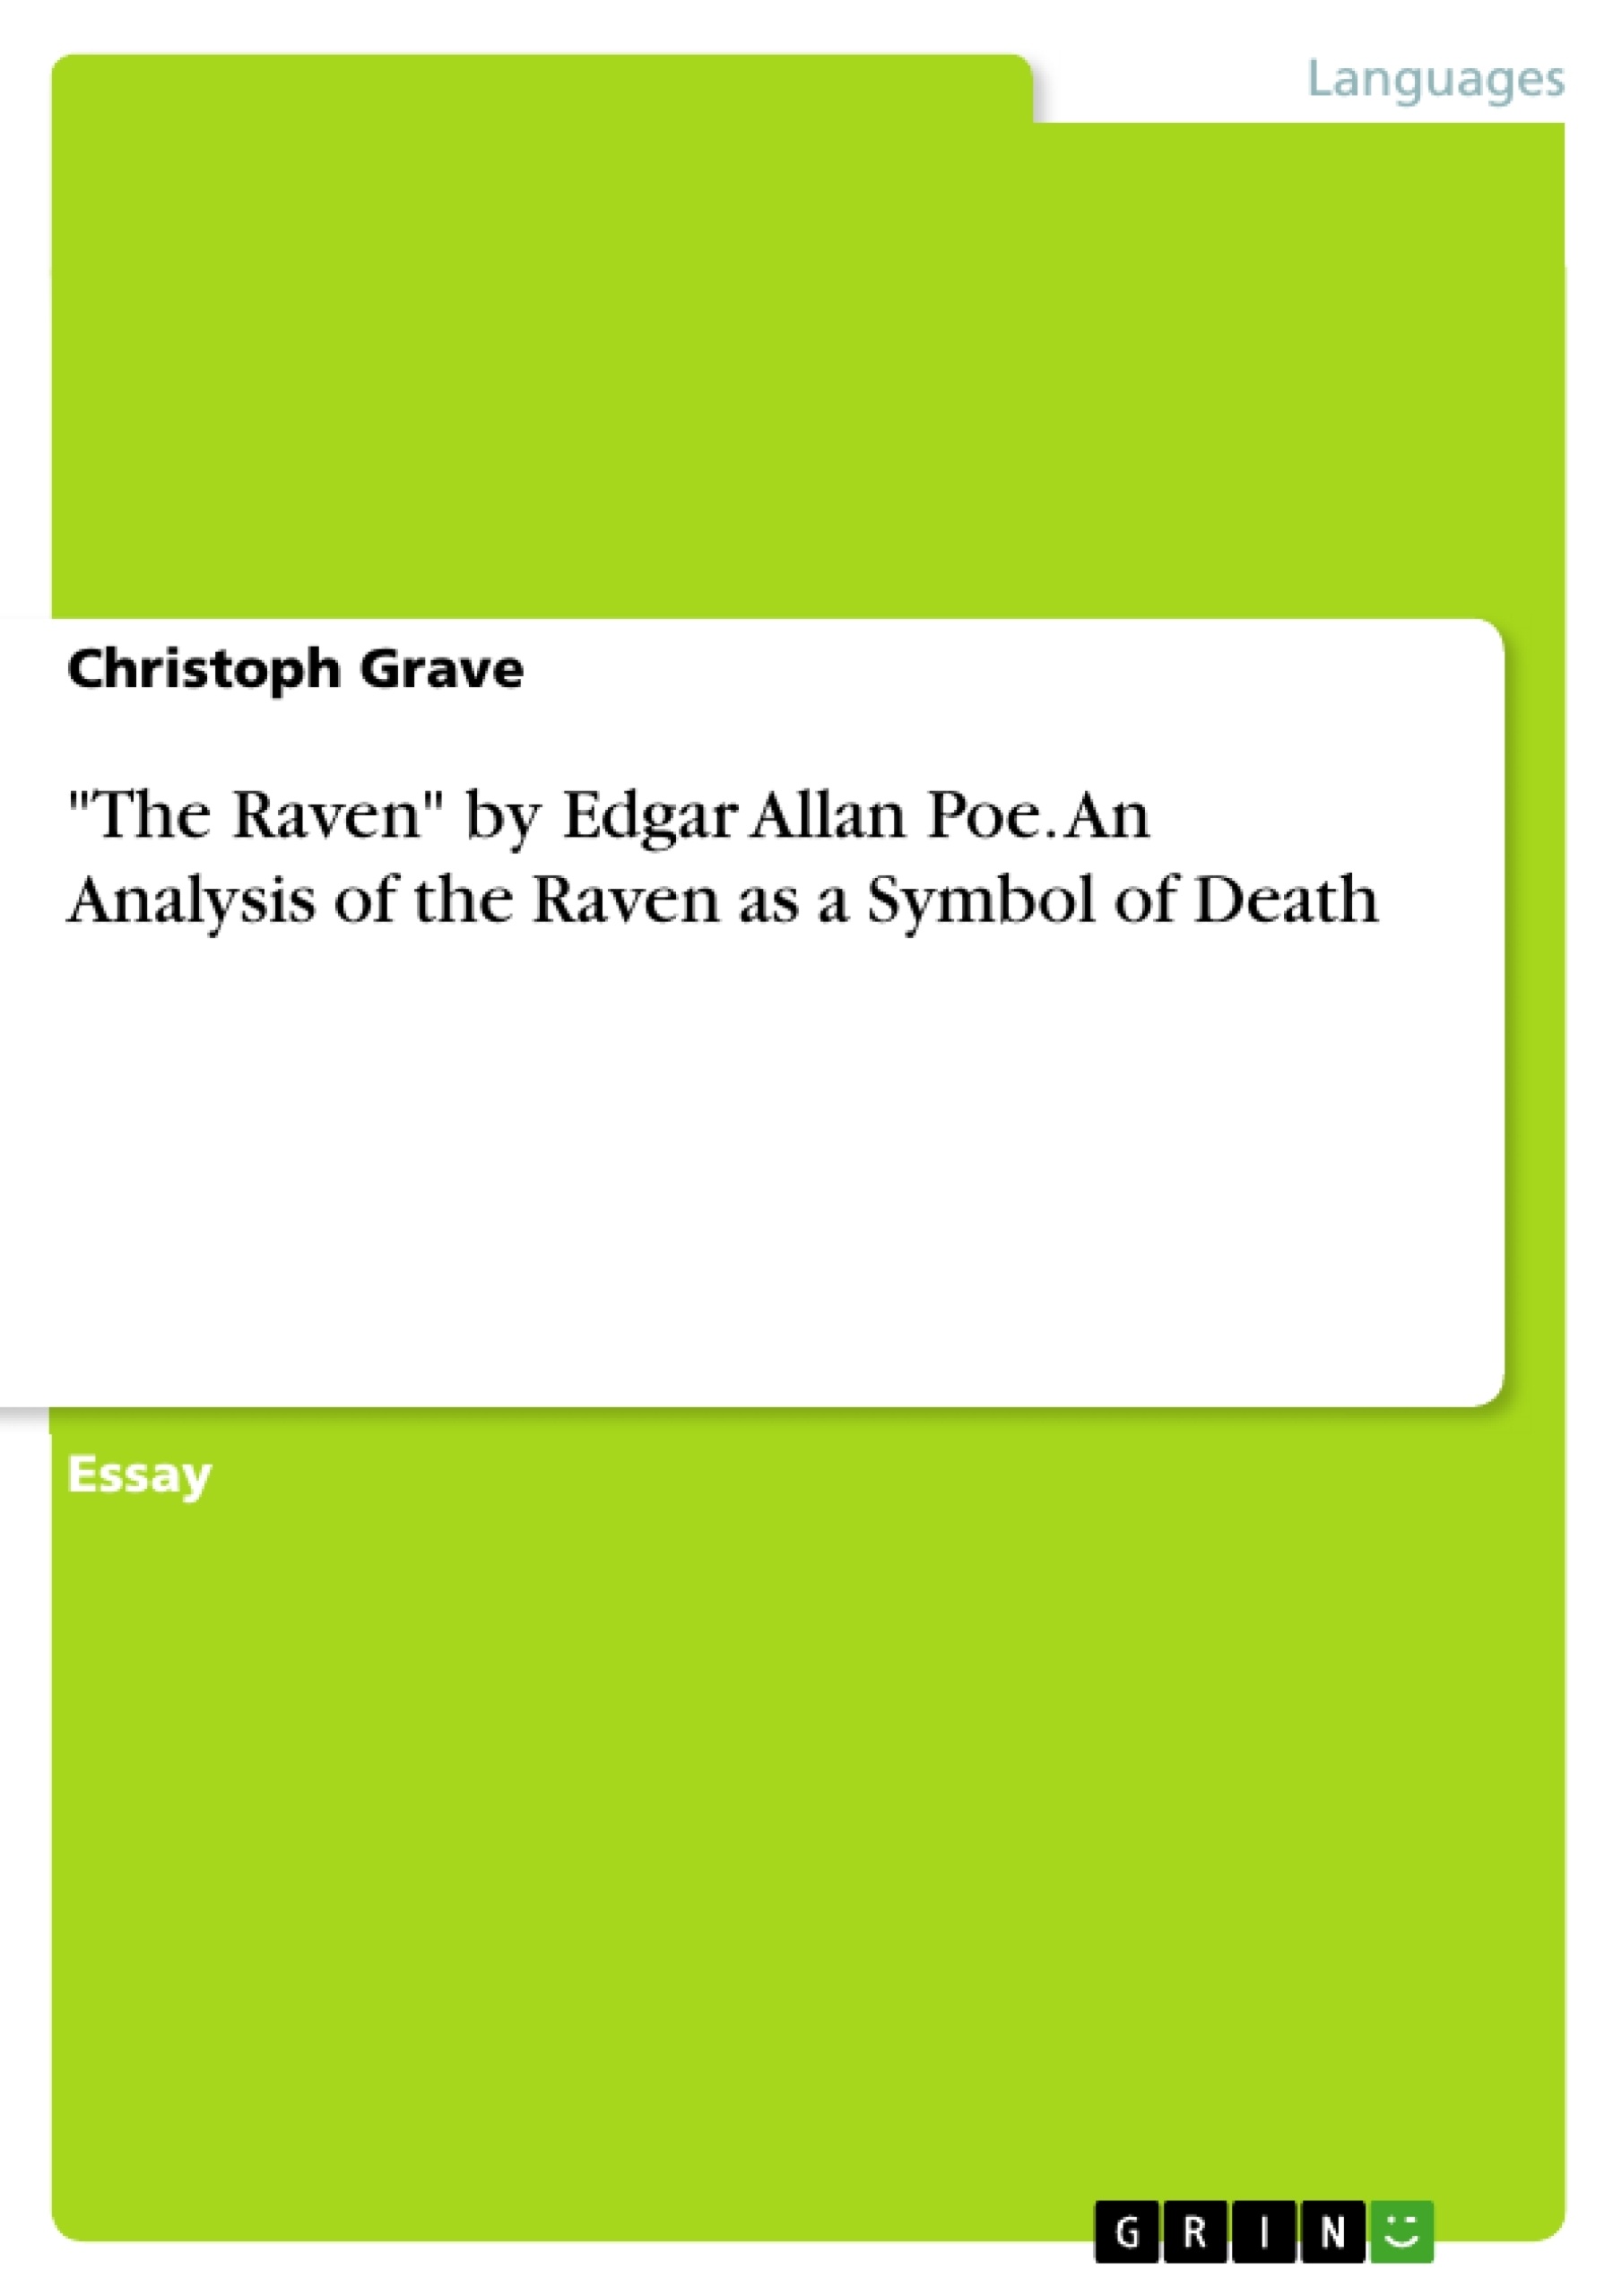 Titel: "The Raven" by Edgar Allan Poe. An Analysis of the Raven as a Symbol of Death